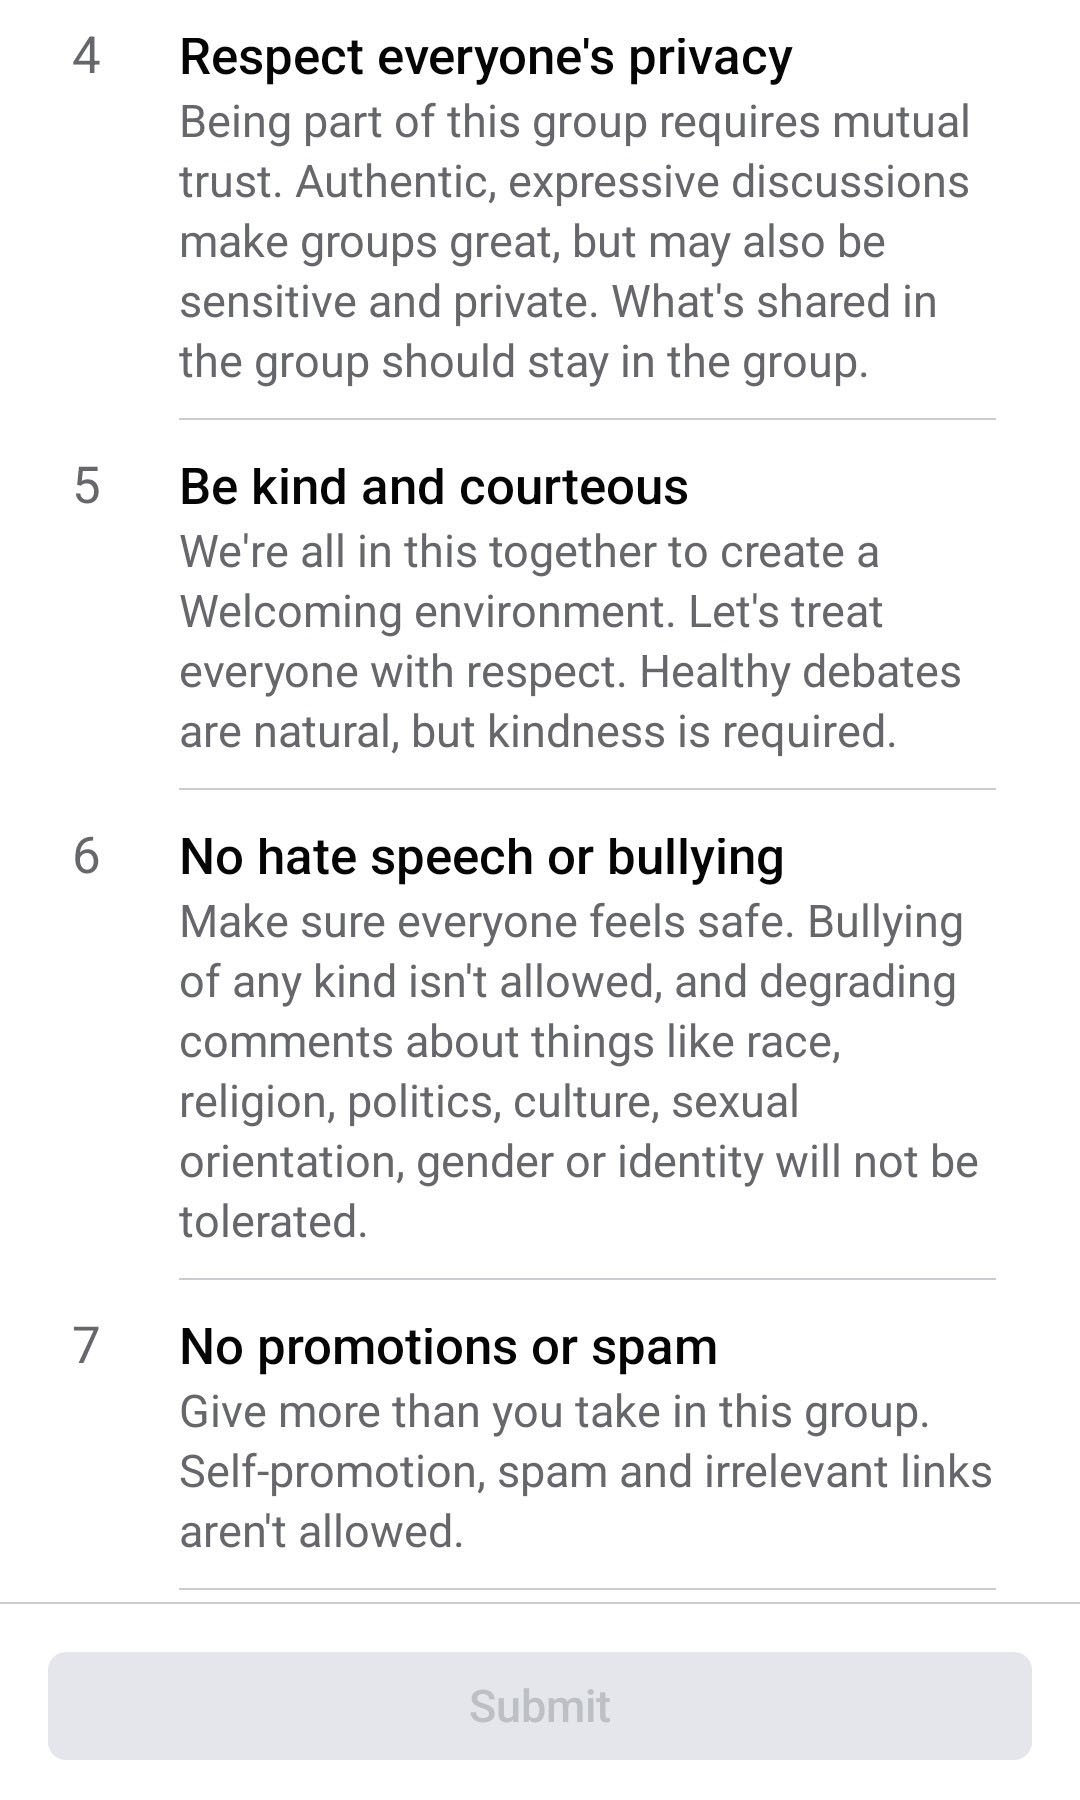 second screenshot of group rules